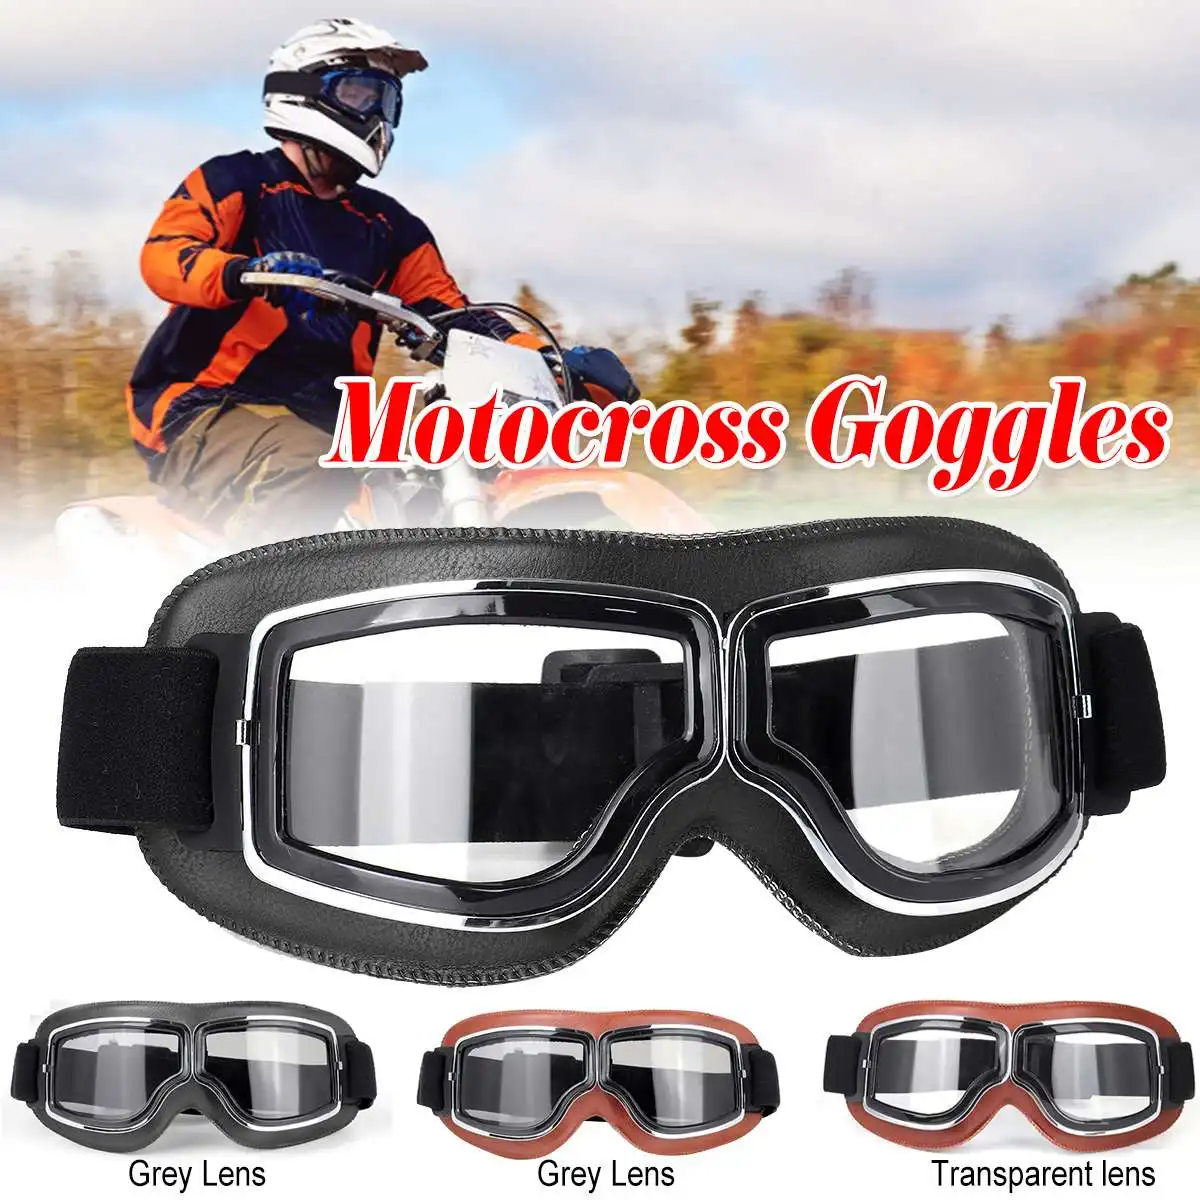 Motocross Goggles Sports Goggles Eyewere Glasses Dirt Bike Riding Cycling Off road Motorcycle ski Big Lens 